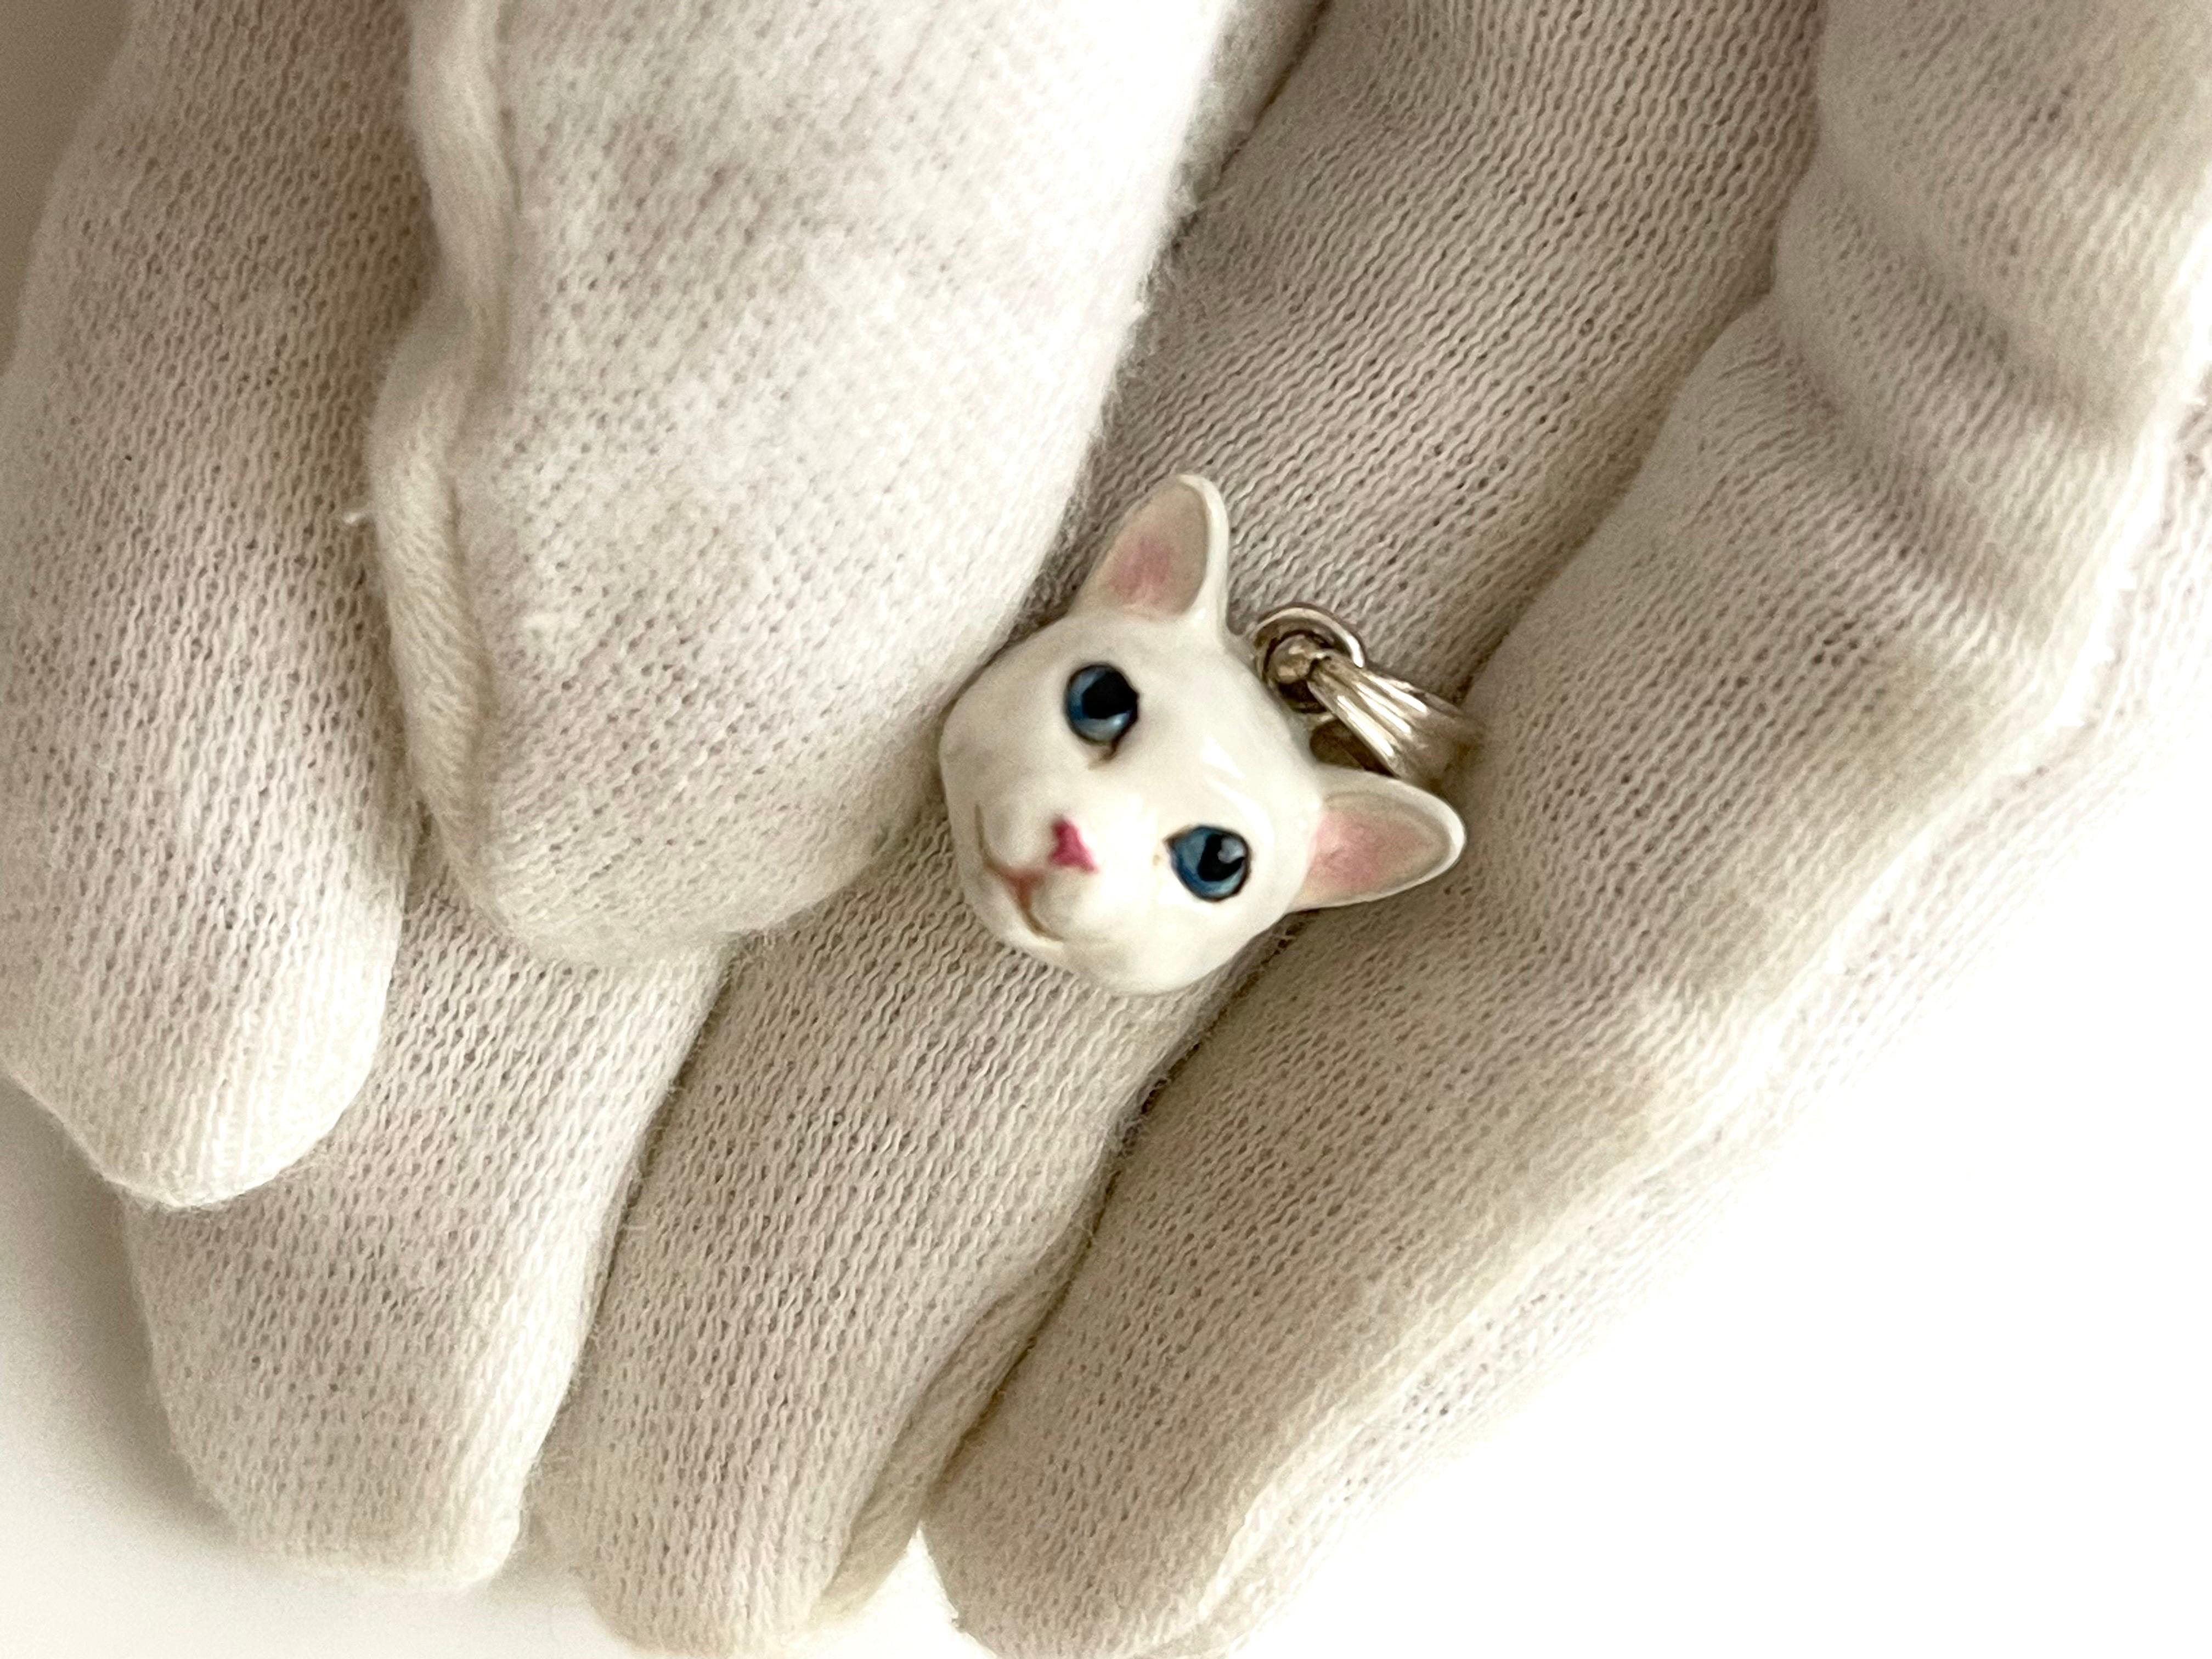 Pendant made in sterling silver 925, totally hand made and hand painted. This pendant feature a white cat with blue eyes and thanks to amazing hand enamel life-like features is vividly rendered. 

Its possible to depict your cat just sending a few